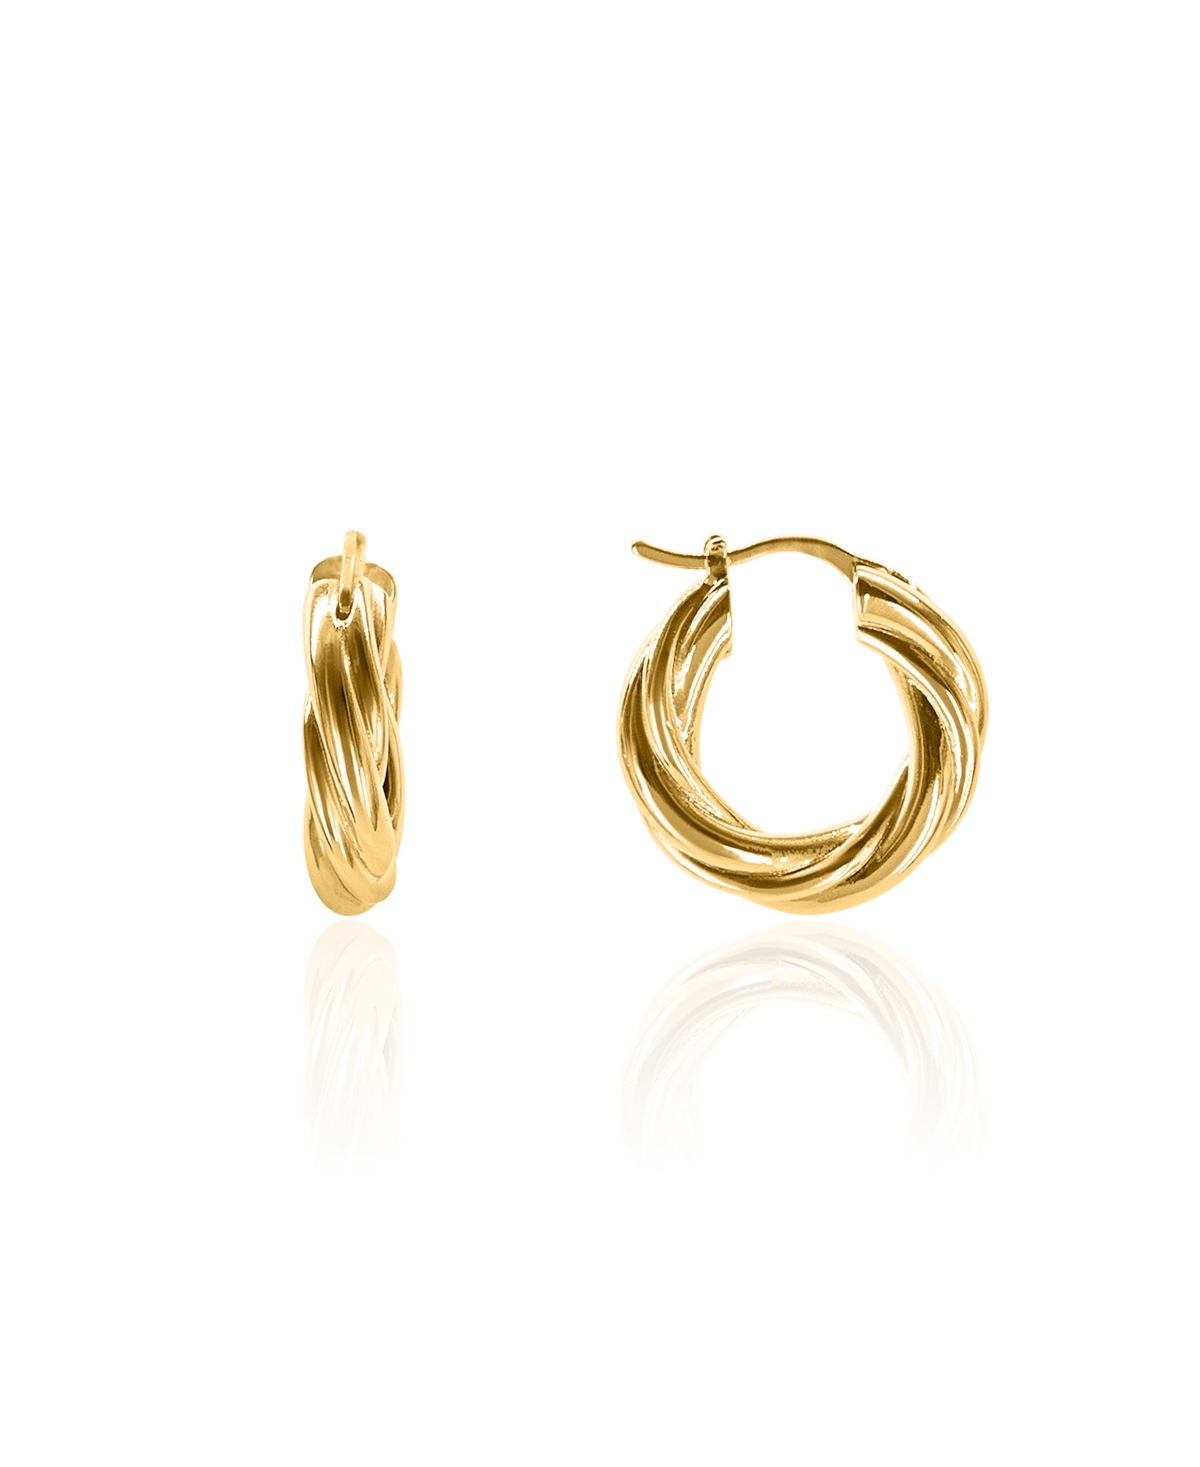 Abma Small Hoops - Gold Tone